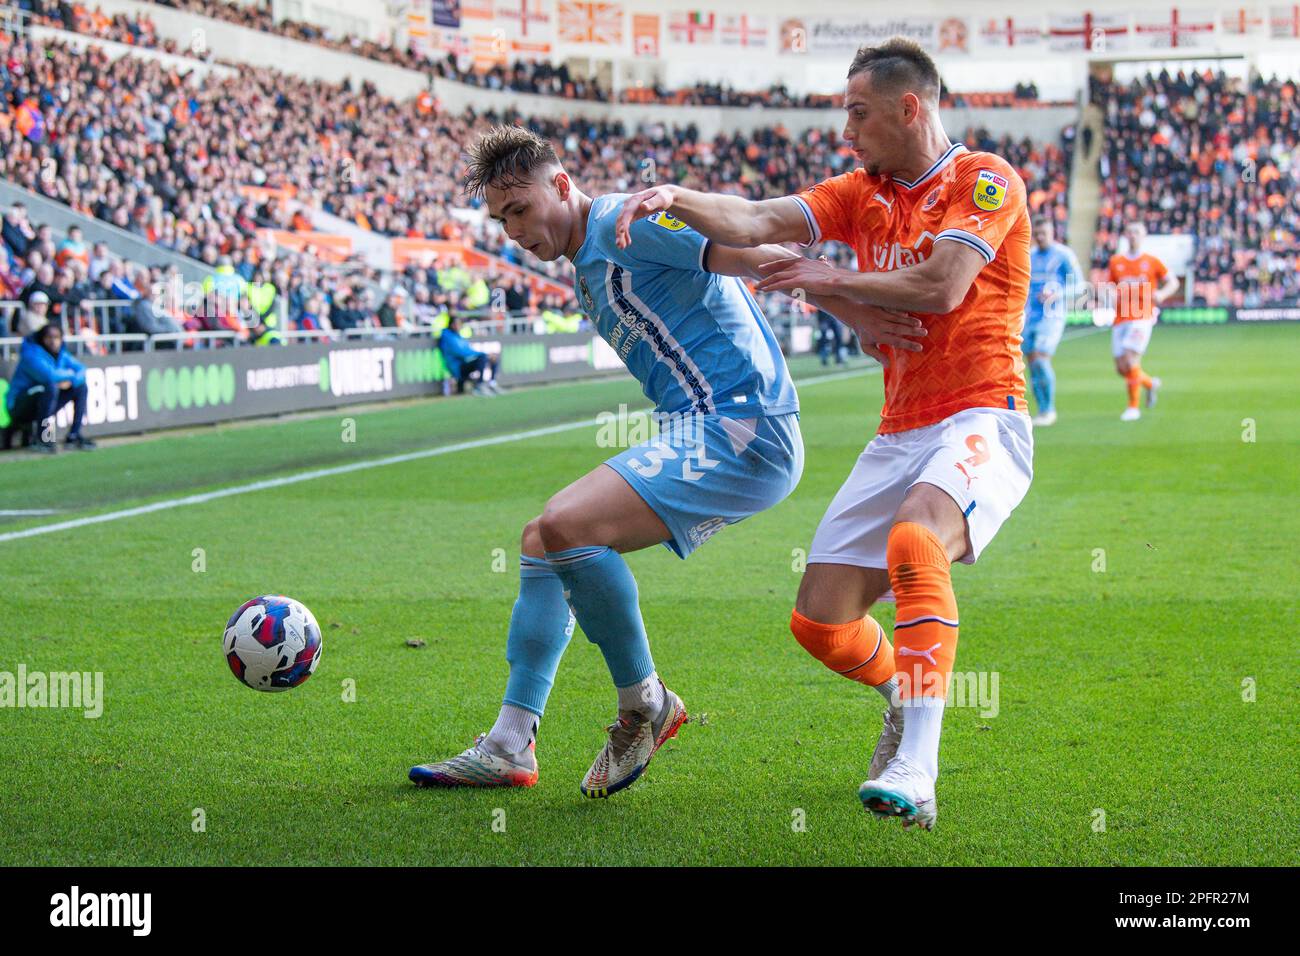 Jerry Yates #9 of Blackpool and battles for the ball with Callum Doyle #3 of Coventry City during the Sky Bet Championship match Blackpool vs Coventry City at Bloomfield Road, Blackpool, United Kingdom, 18th March 2023 (Photo by Craig Thomas/News Images) in, on 3/18/2023. (Photo by Craig Thomas/News Images/Sipa USA) Credit: Sipa USA/Alamy Live News Stock Photo